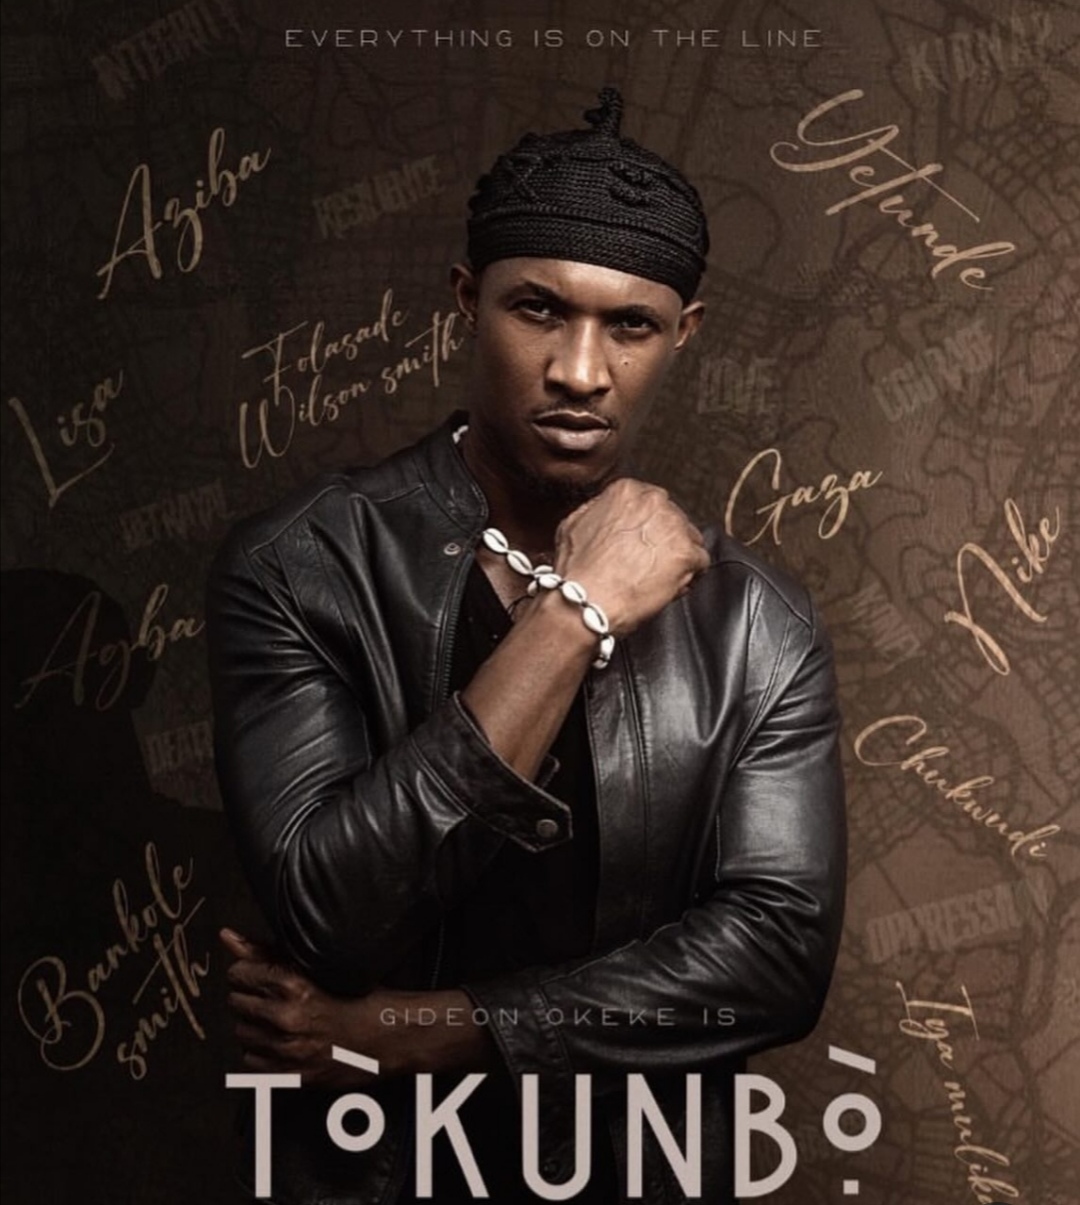 Ramsey Nouah’s Contemporary Film, “Tokunbo”, Starring Gideon Okeke, Adunni Ade, and More is Field for Netflix Originate on August 23